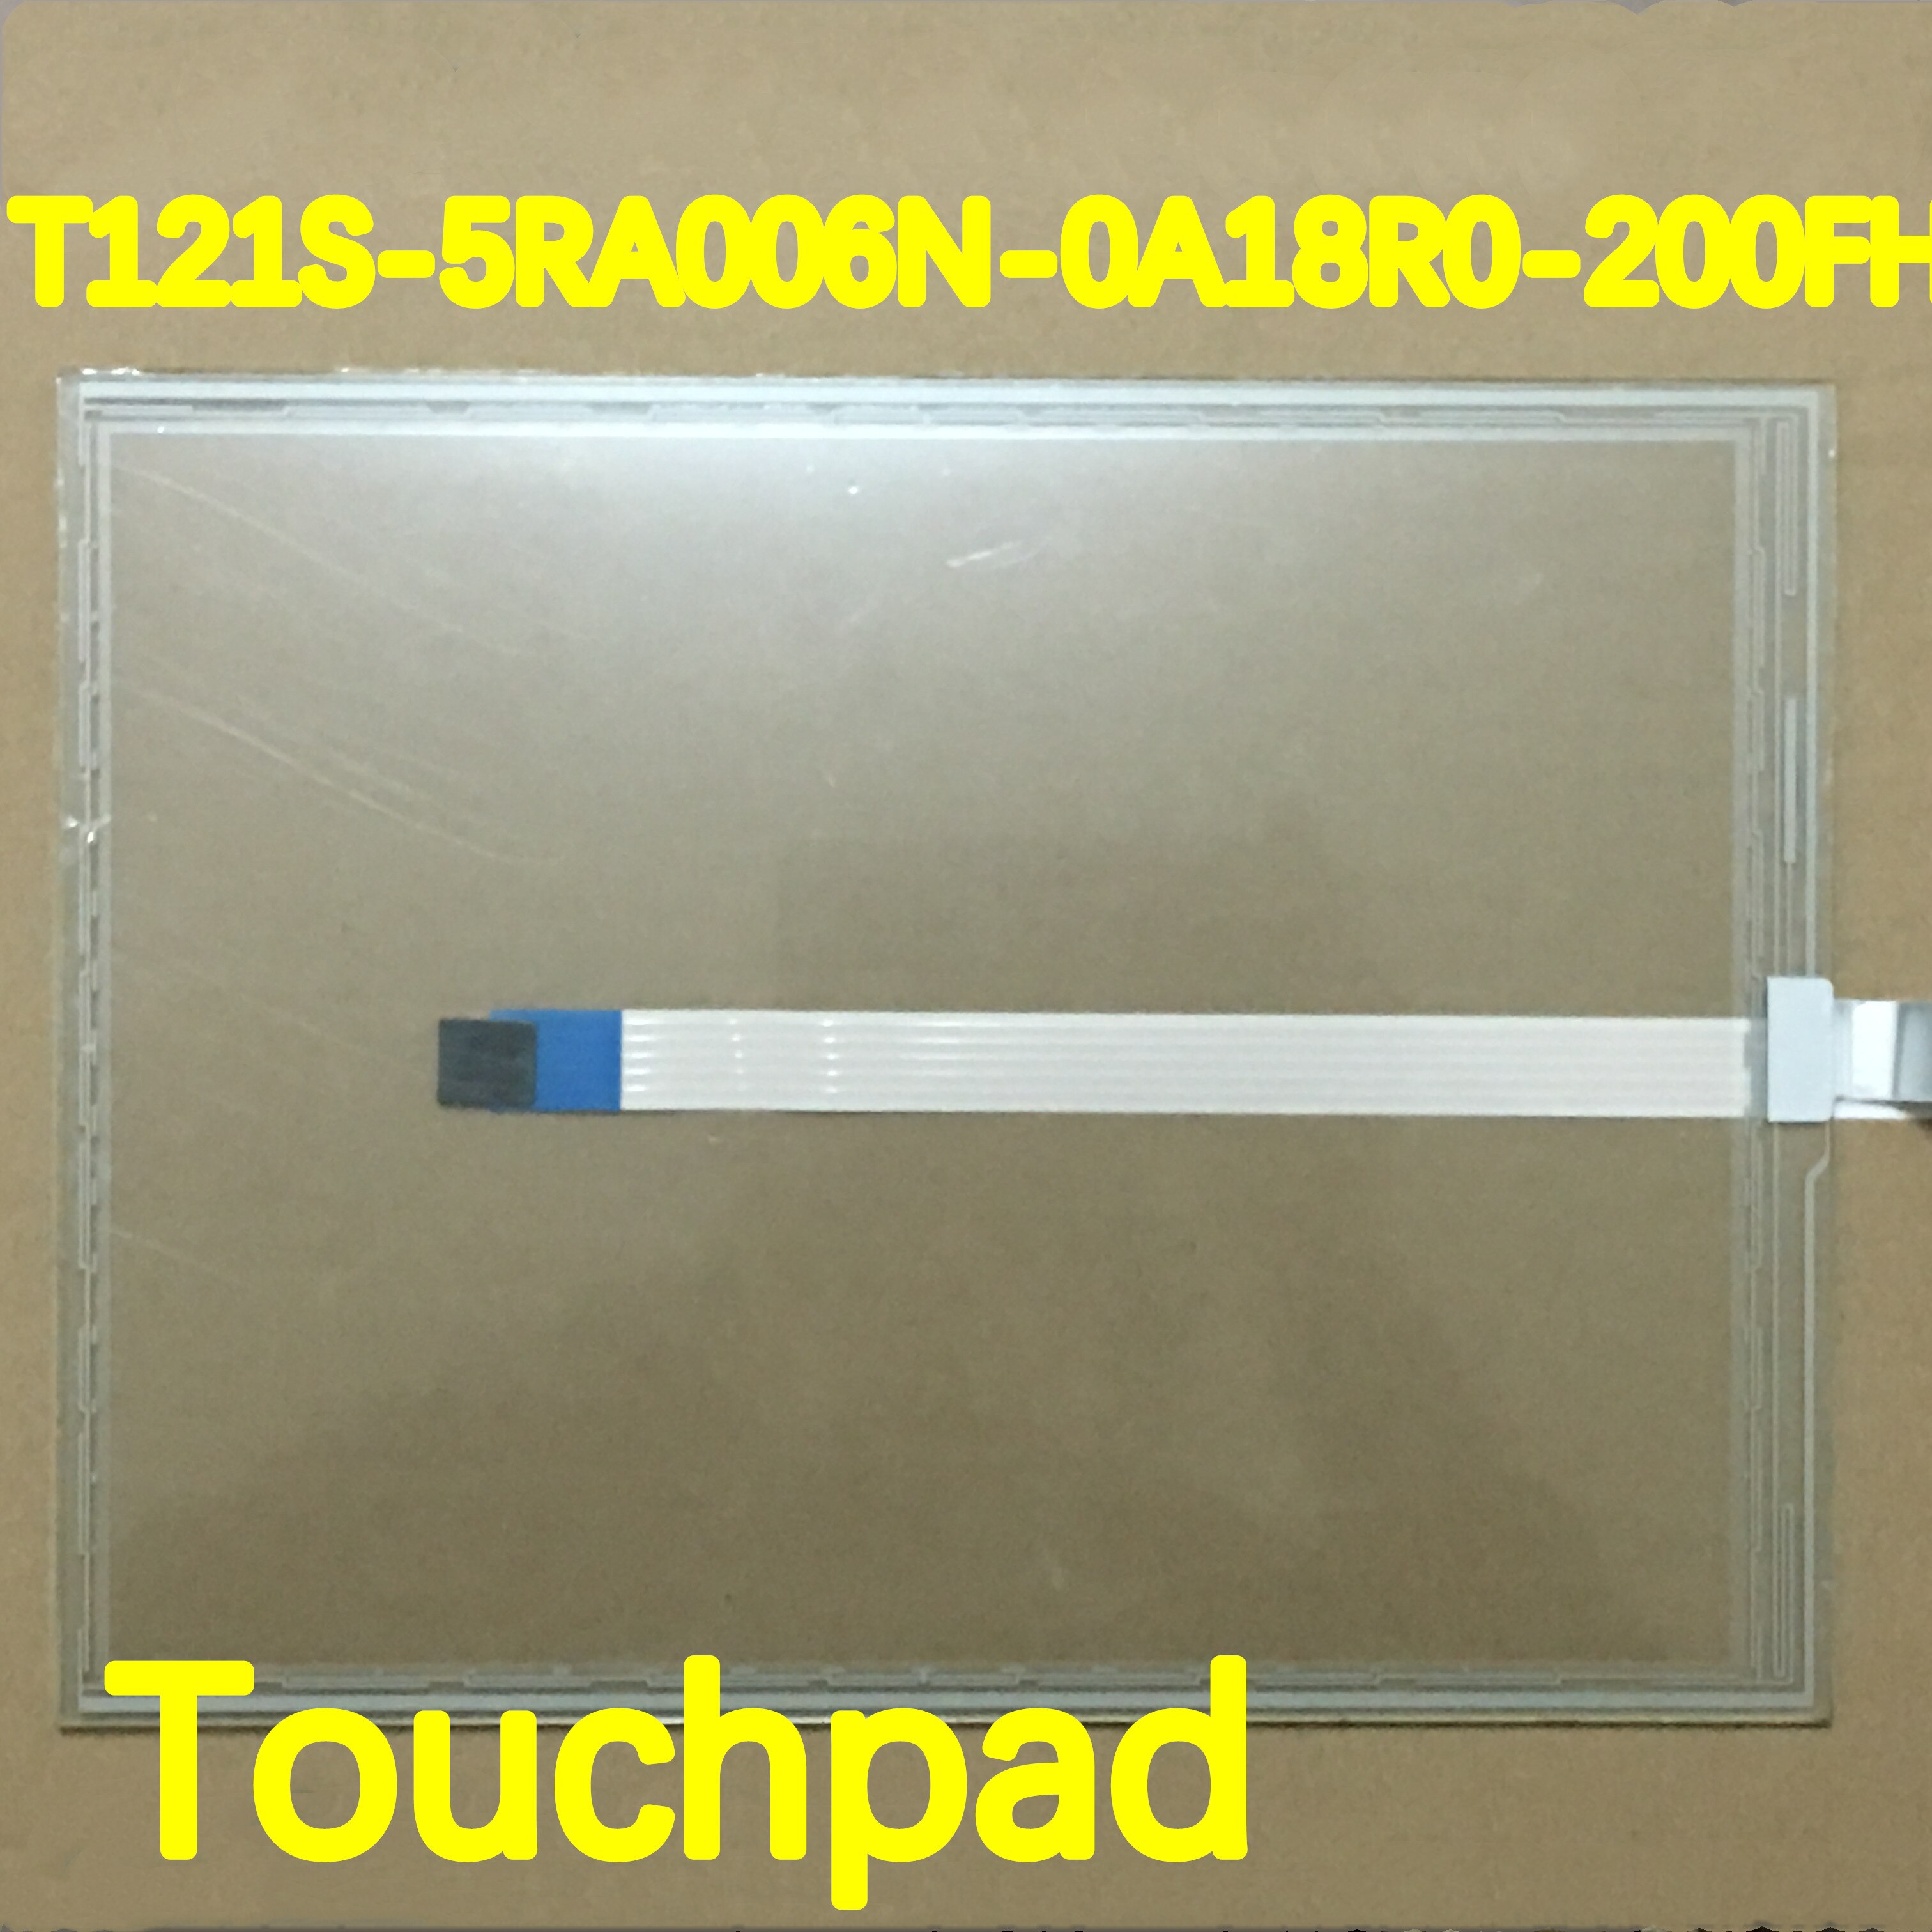 T121s-5 ra 006n-0 a 18 r 0-200 fhtouchpad